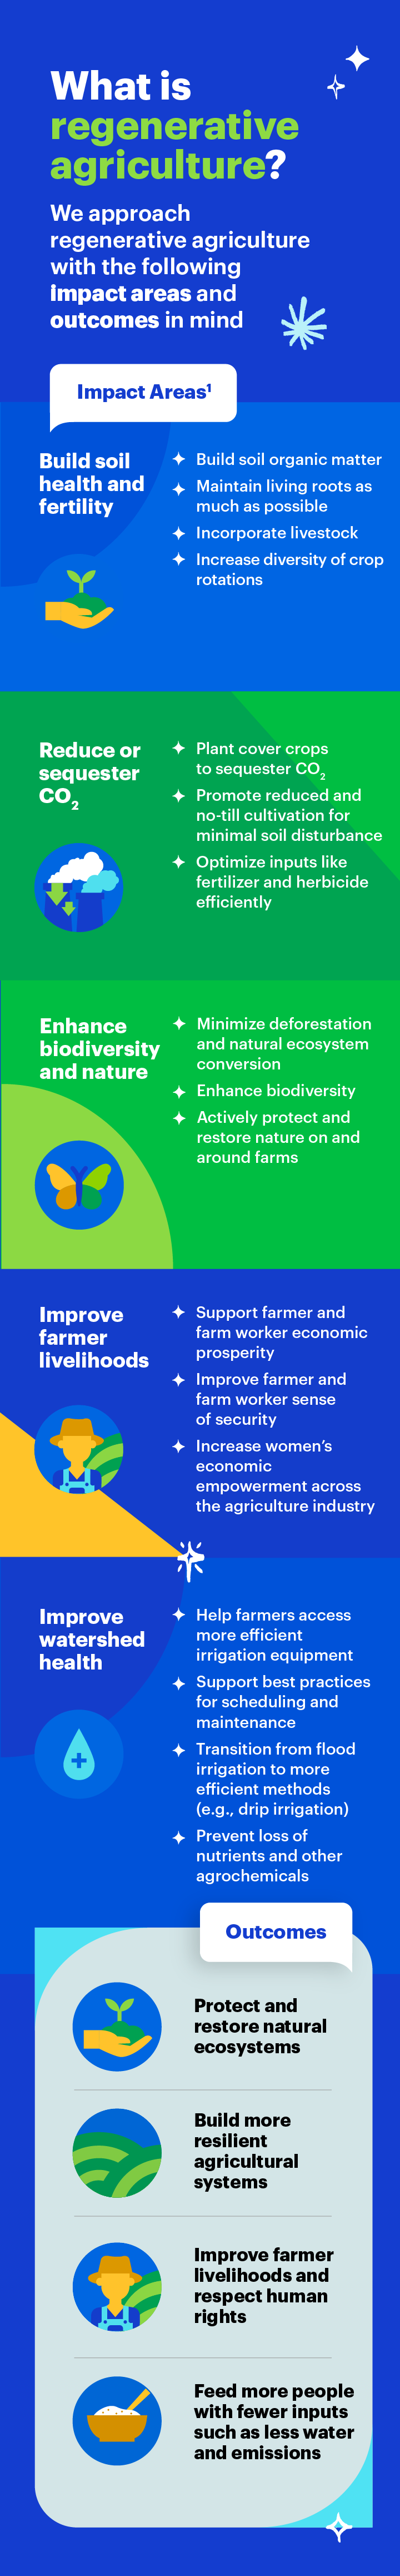 Infographic explaining what regenerative agriculture is and what areas PepsiCo is impacting